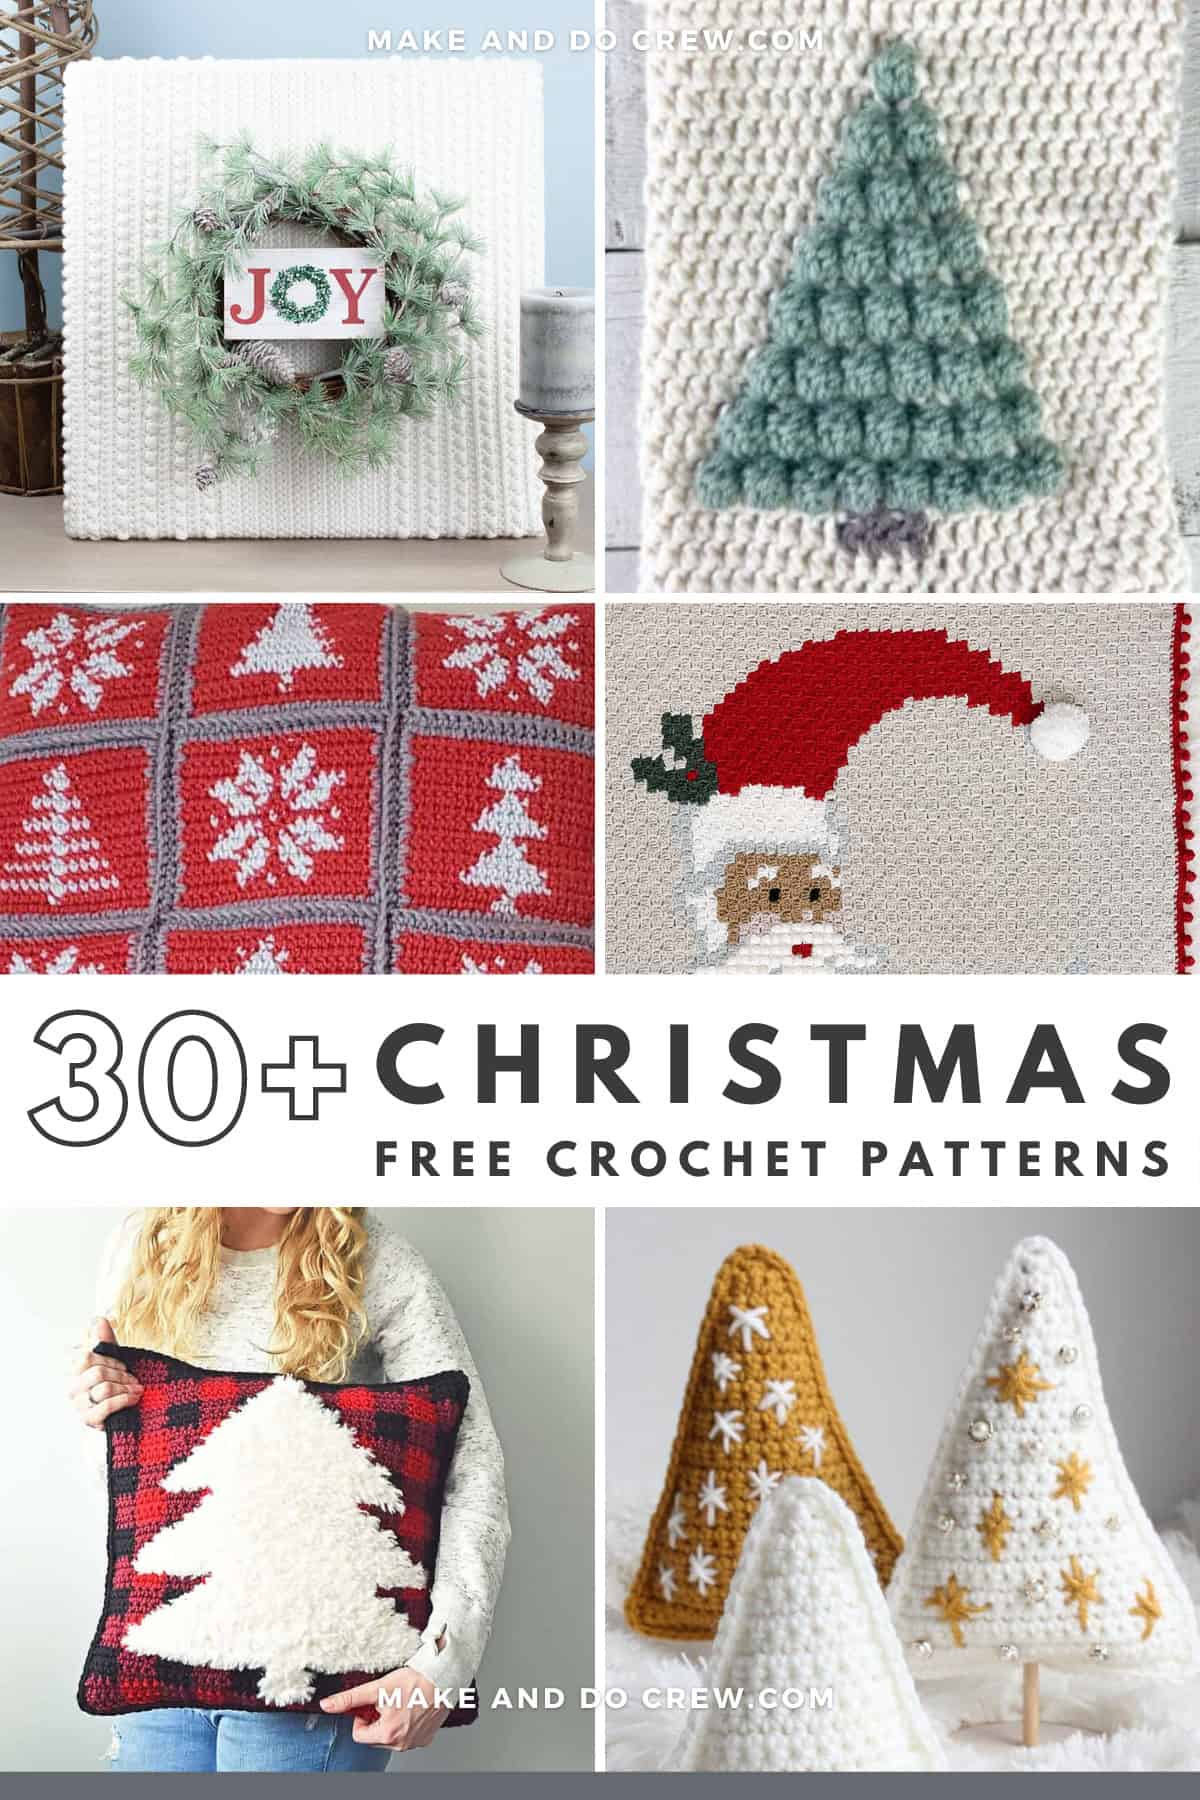 A grid of six crochet Christmas crochet projects including pillows, a C2C crochet Santa blanket, gold and white Christmas trees and a bobble stitch stocking.